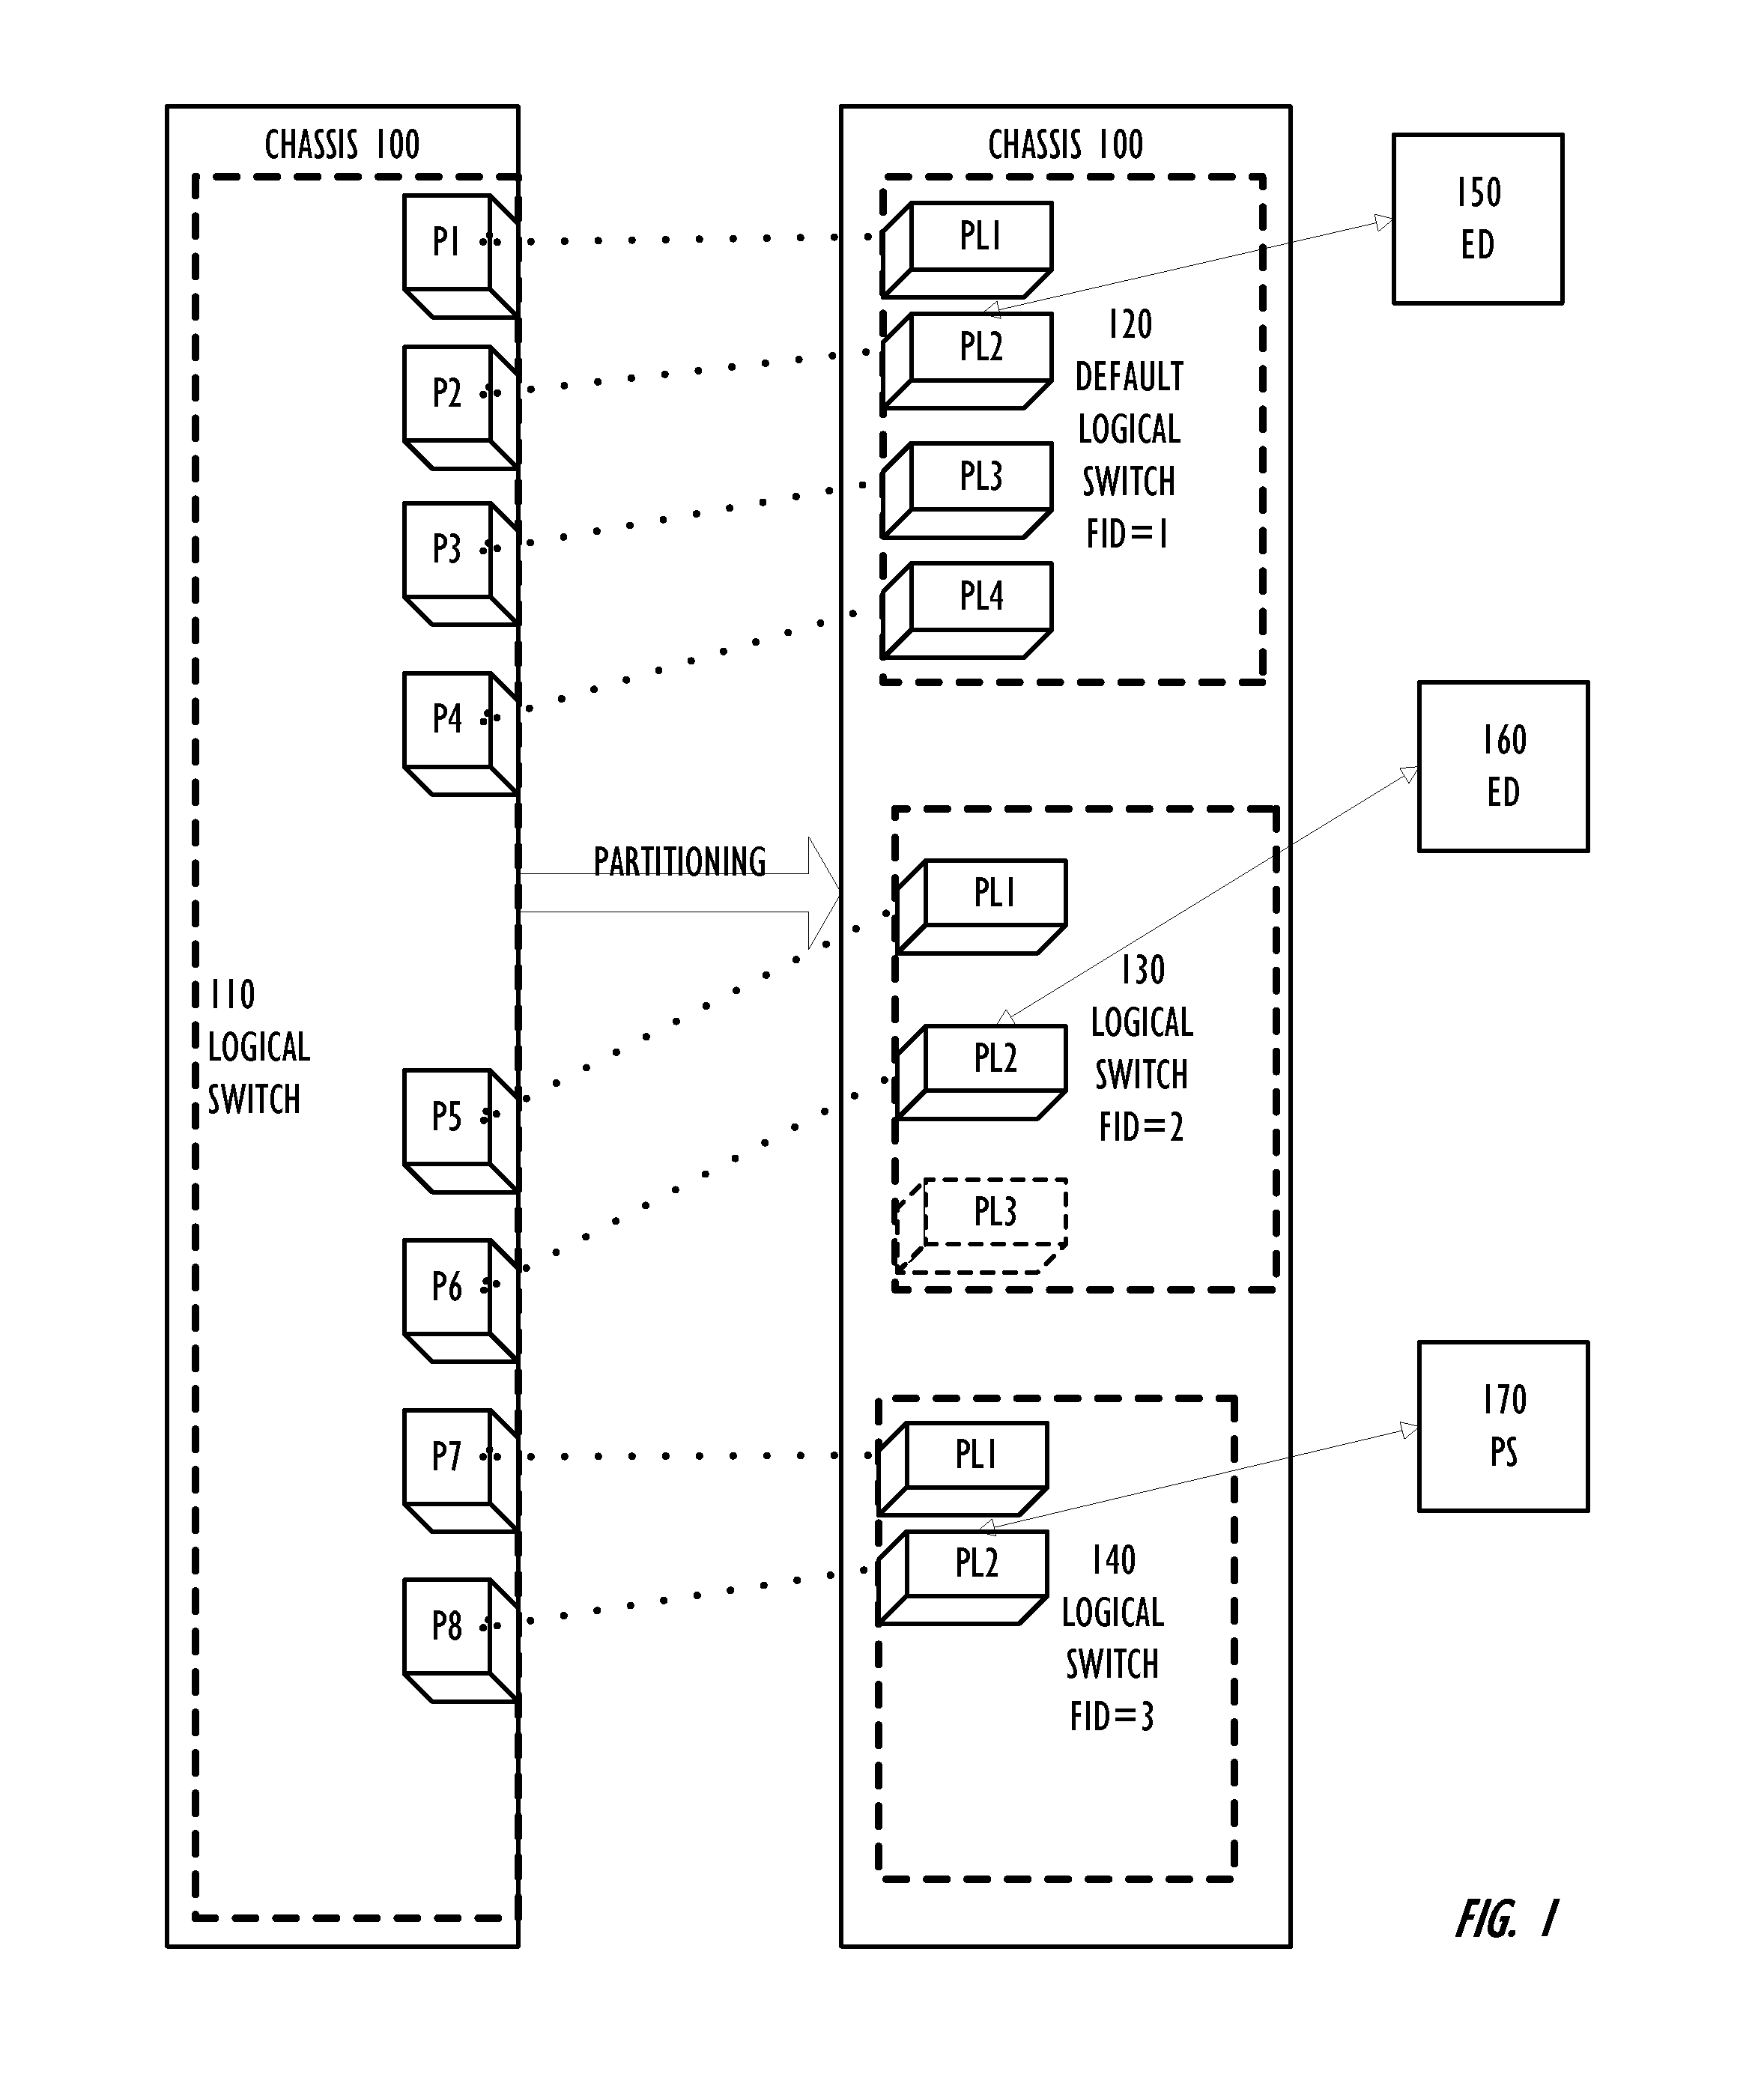 Creation and deletion of logical ports in a logical switch